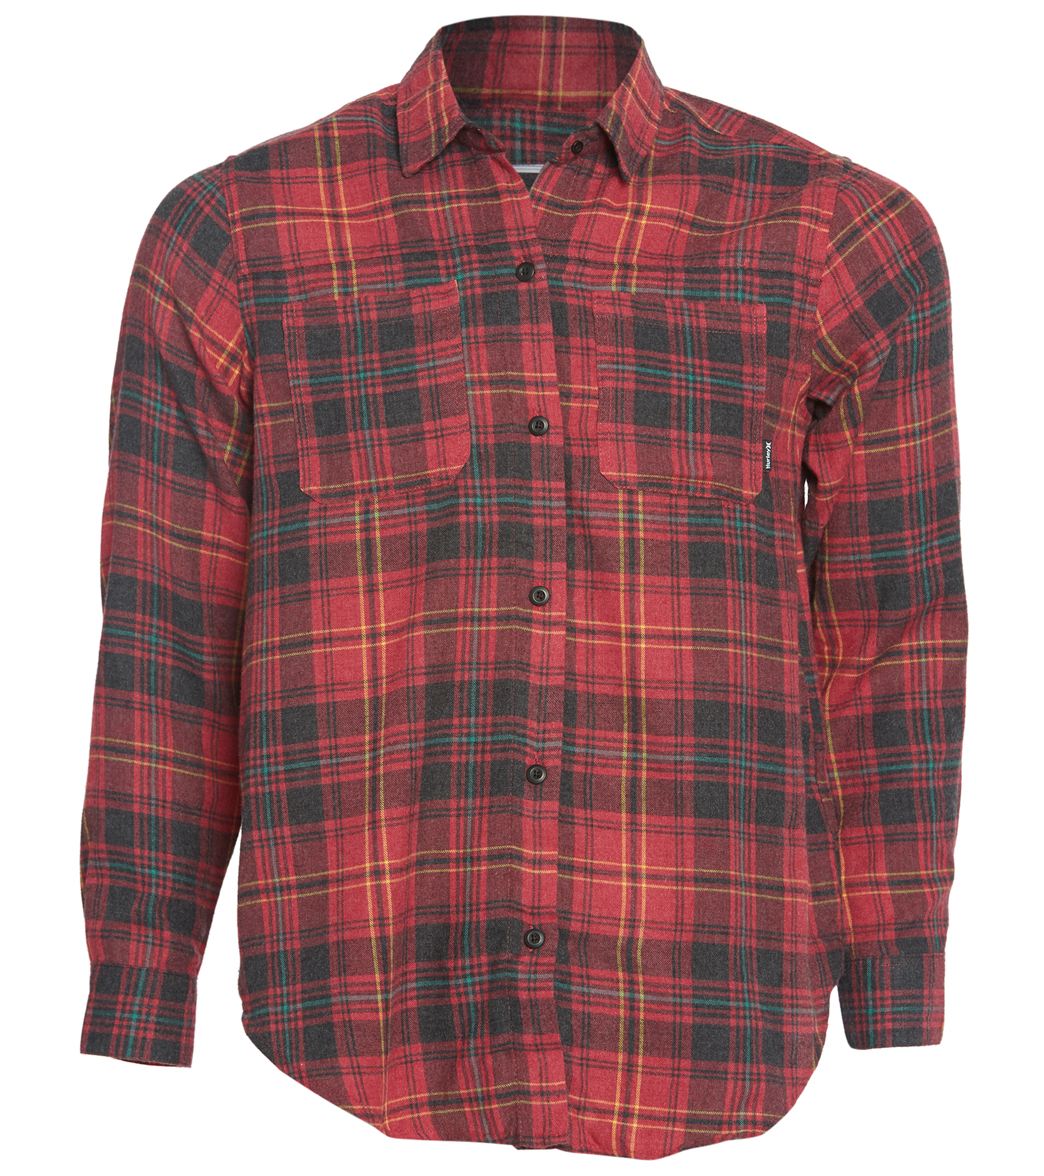 Hurley Wilson Plaid Long Sleeve Shirt - Noble Red Xl Cotton/Polyester - Swimoutlet.com